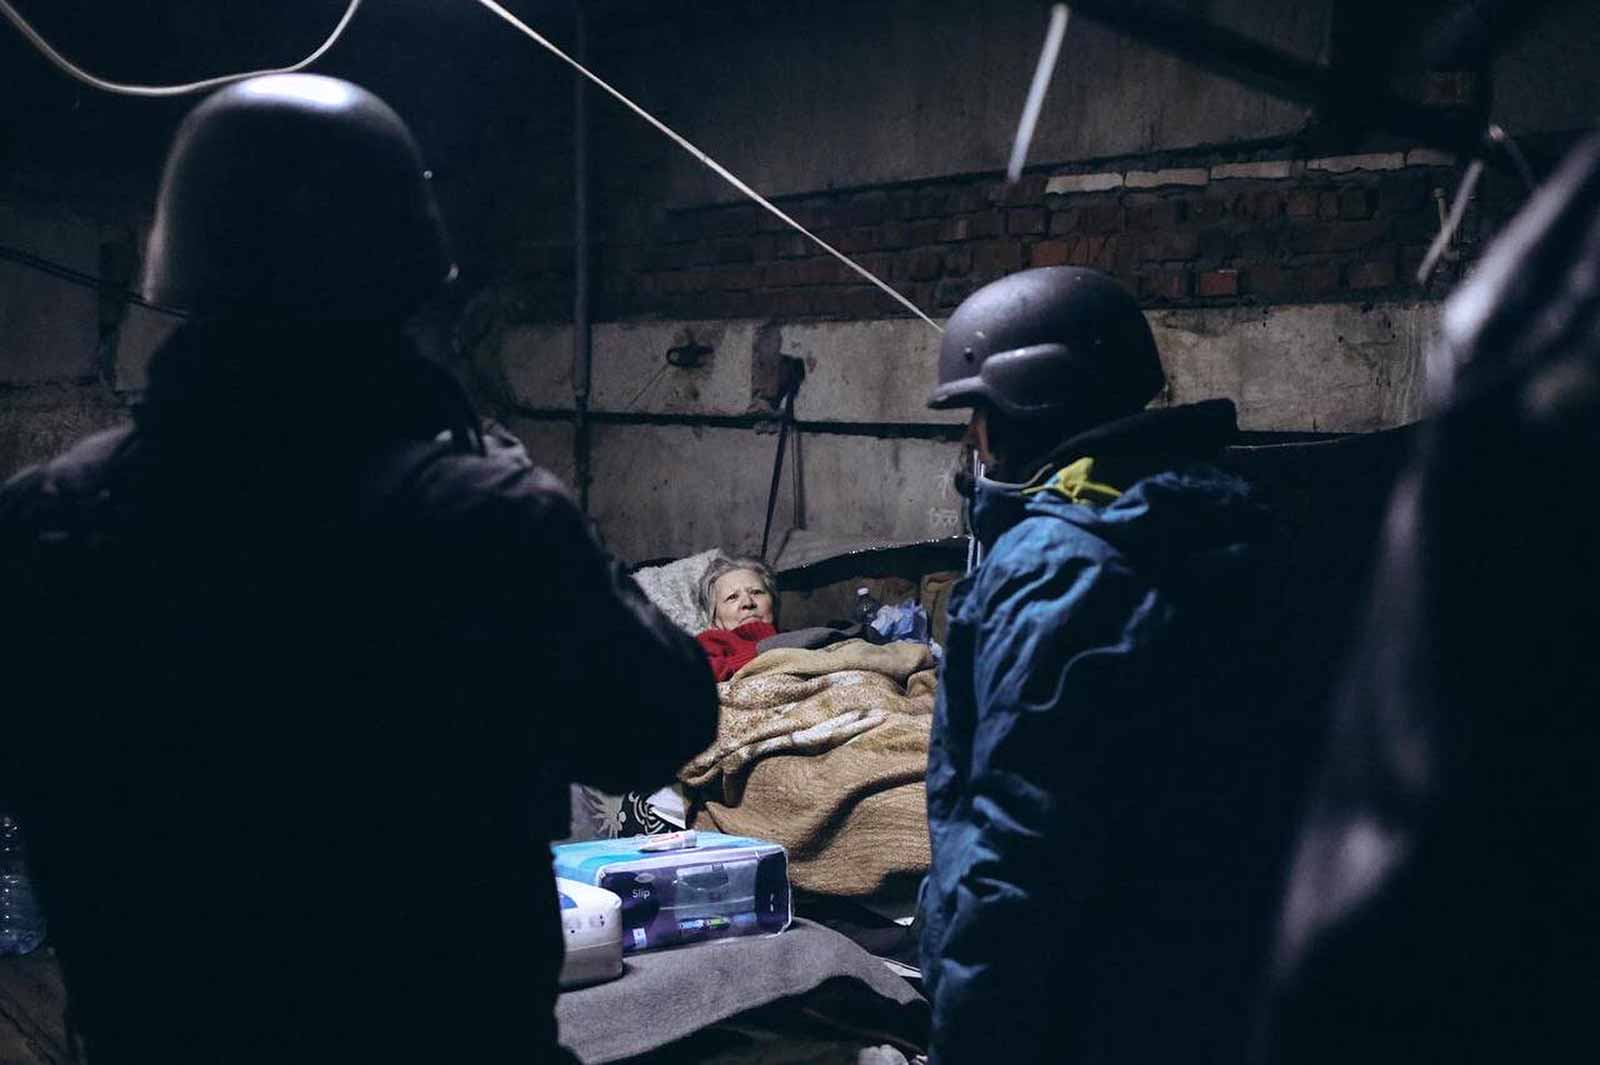 Volunteers visit a shelter. About 6,000 people remain in Bakhmut, which had a pre-war population of 73,000. The city has no electricity, no potable water, no gas and civilians rely on generators, food, water and medicine distributed by aid workers and Ukrainian forces. © Anastasia Rokytna/IWPR